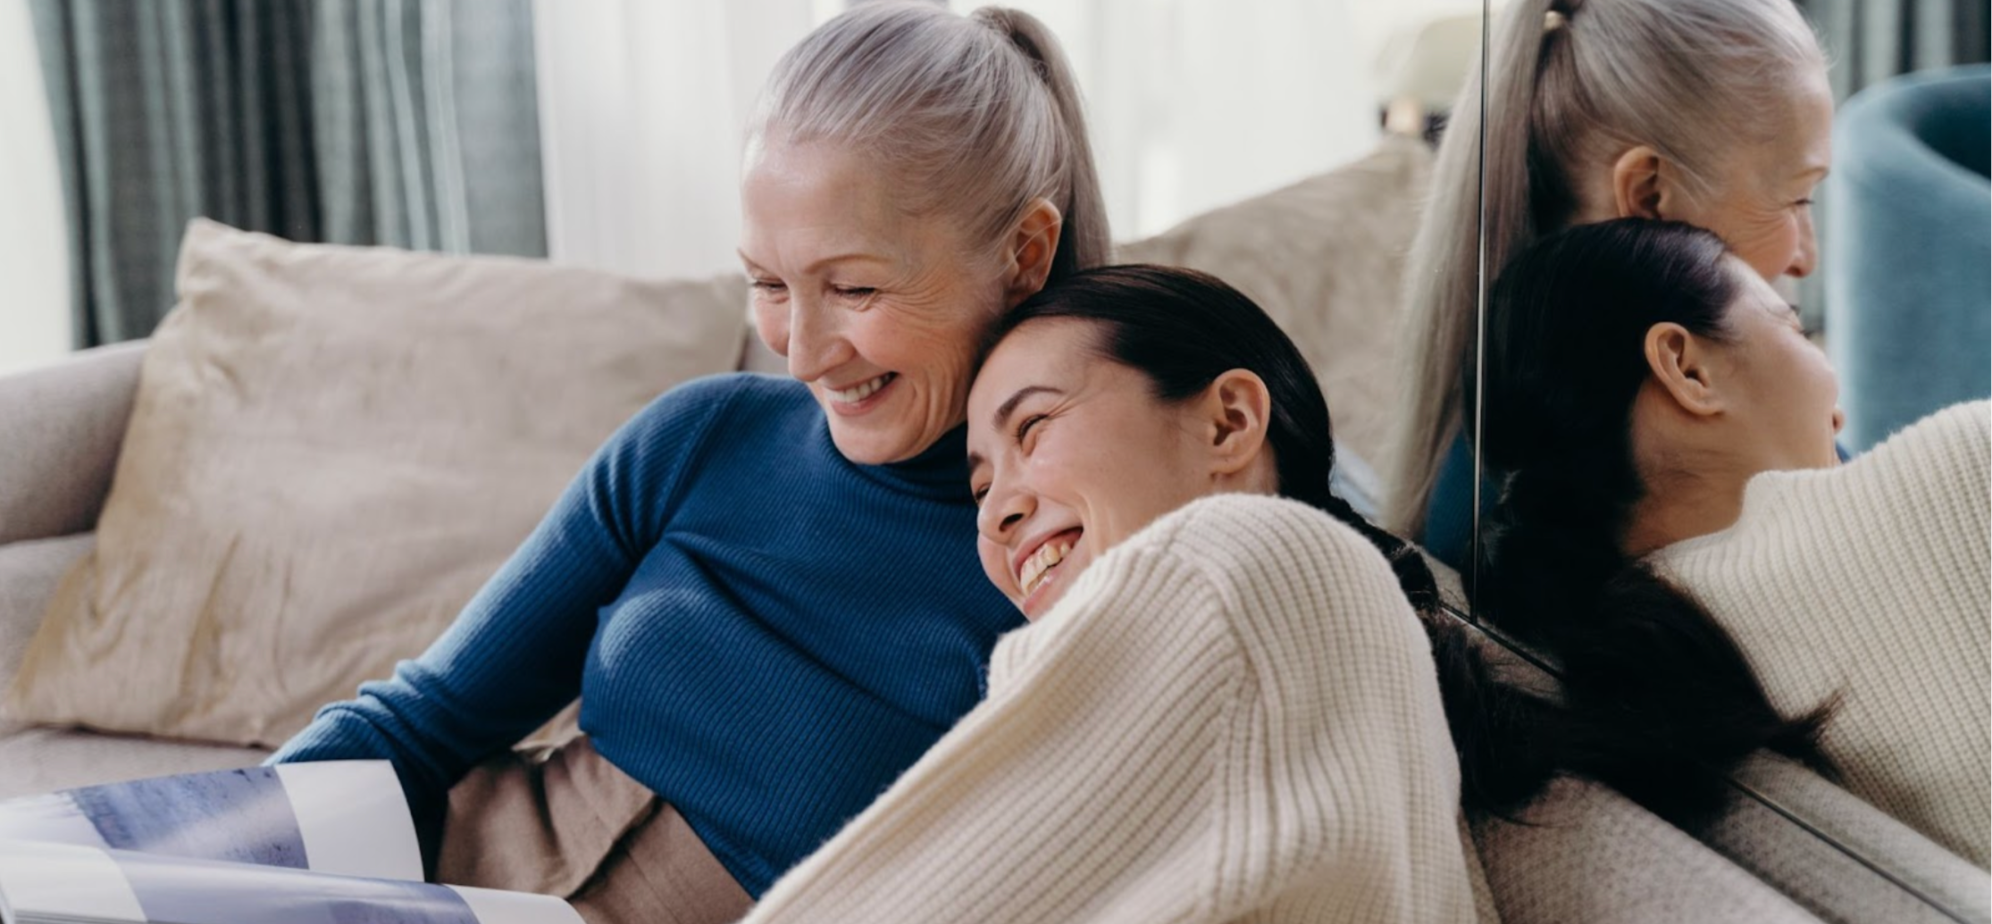 Smiling mother and daughter, an older woman with grey hair and a younger woman with dark hair